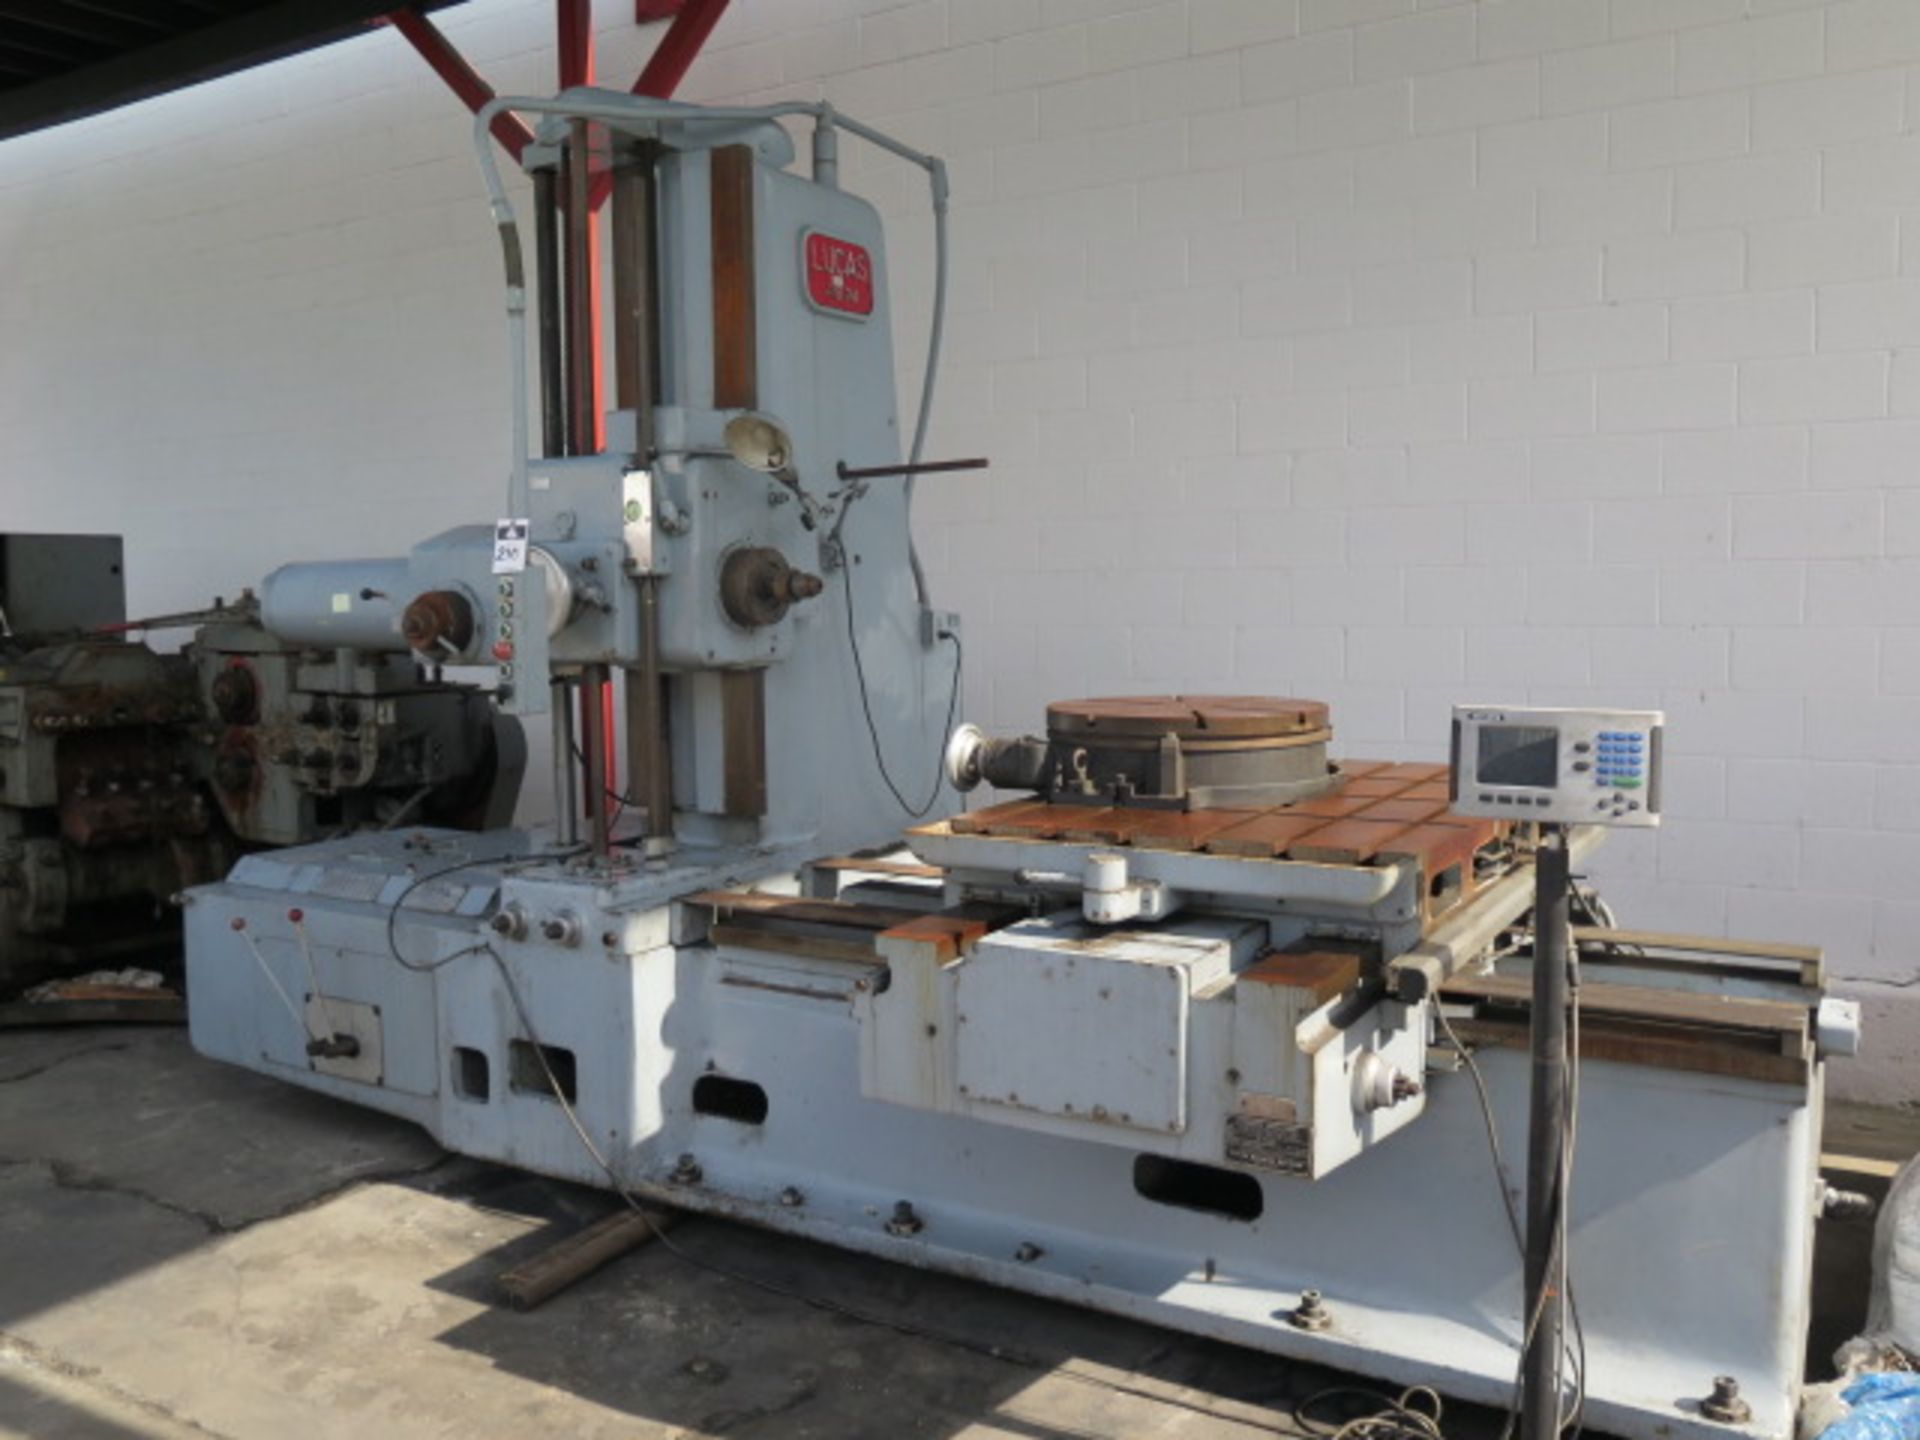 Lucas mdl. 41B-24 Horizontal Boring Mill w/ Acu-Rite Programmable DRO, 13-1500 RPM, Power Feeds, 36” - Image 3 of 11